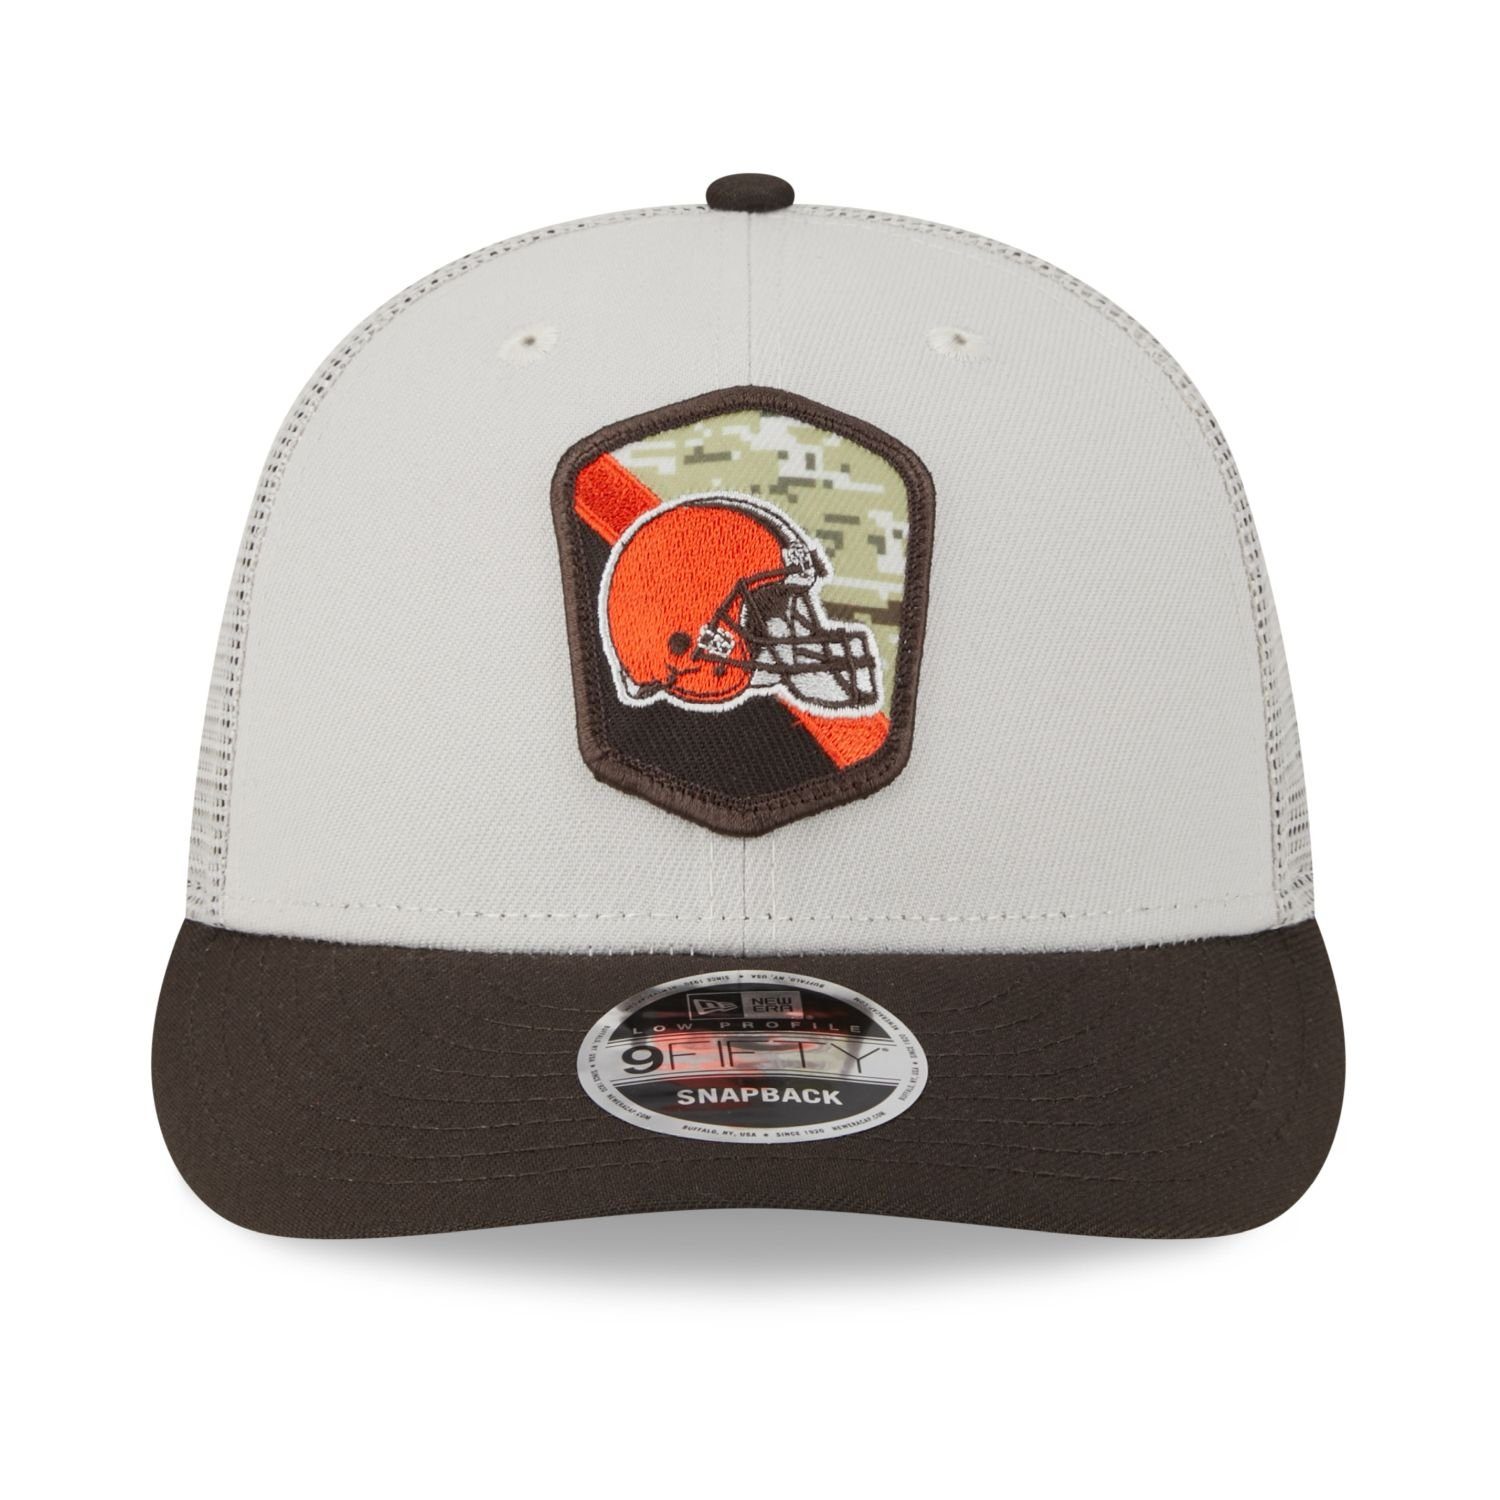 Era Service Snap Browns New Salute Cap Profile to NFL 9Fifty Low Snapback Cleveland